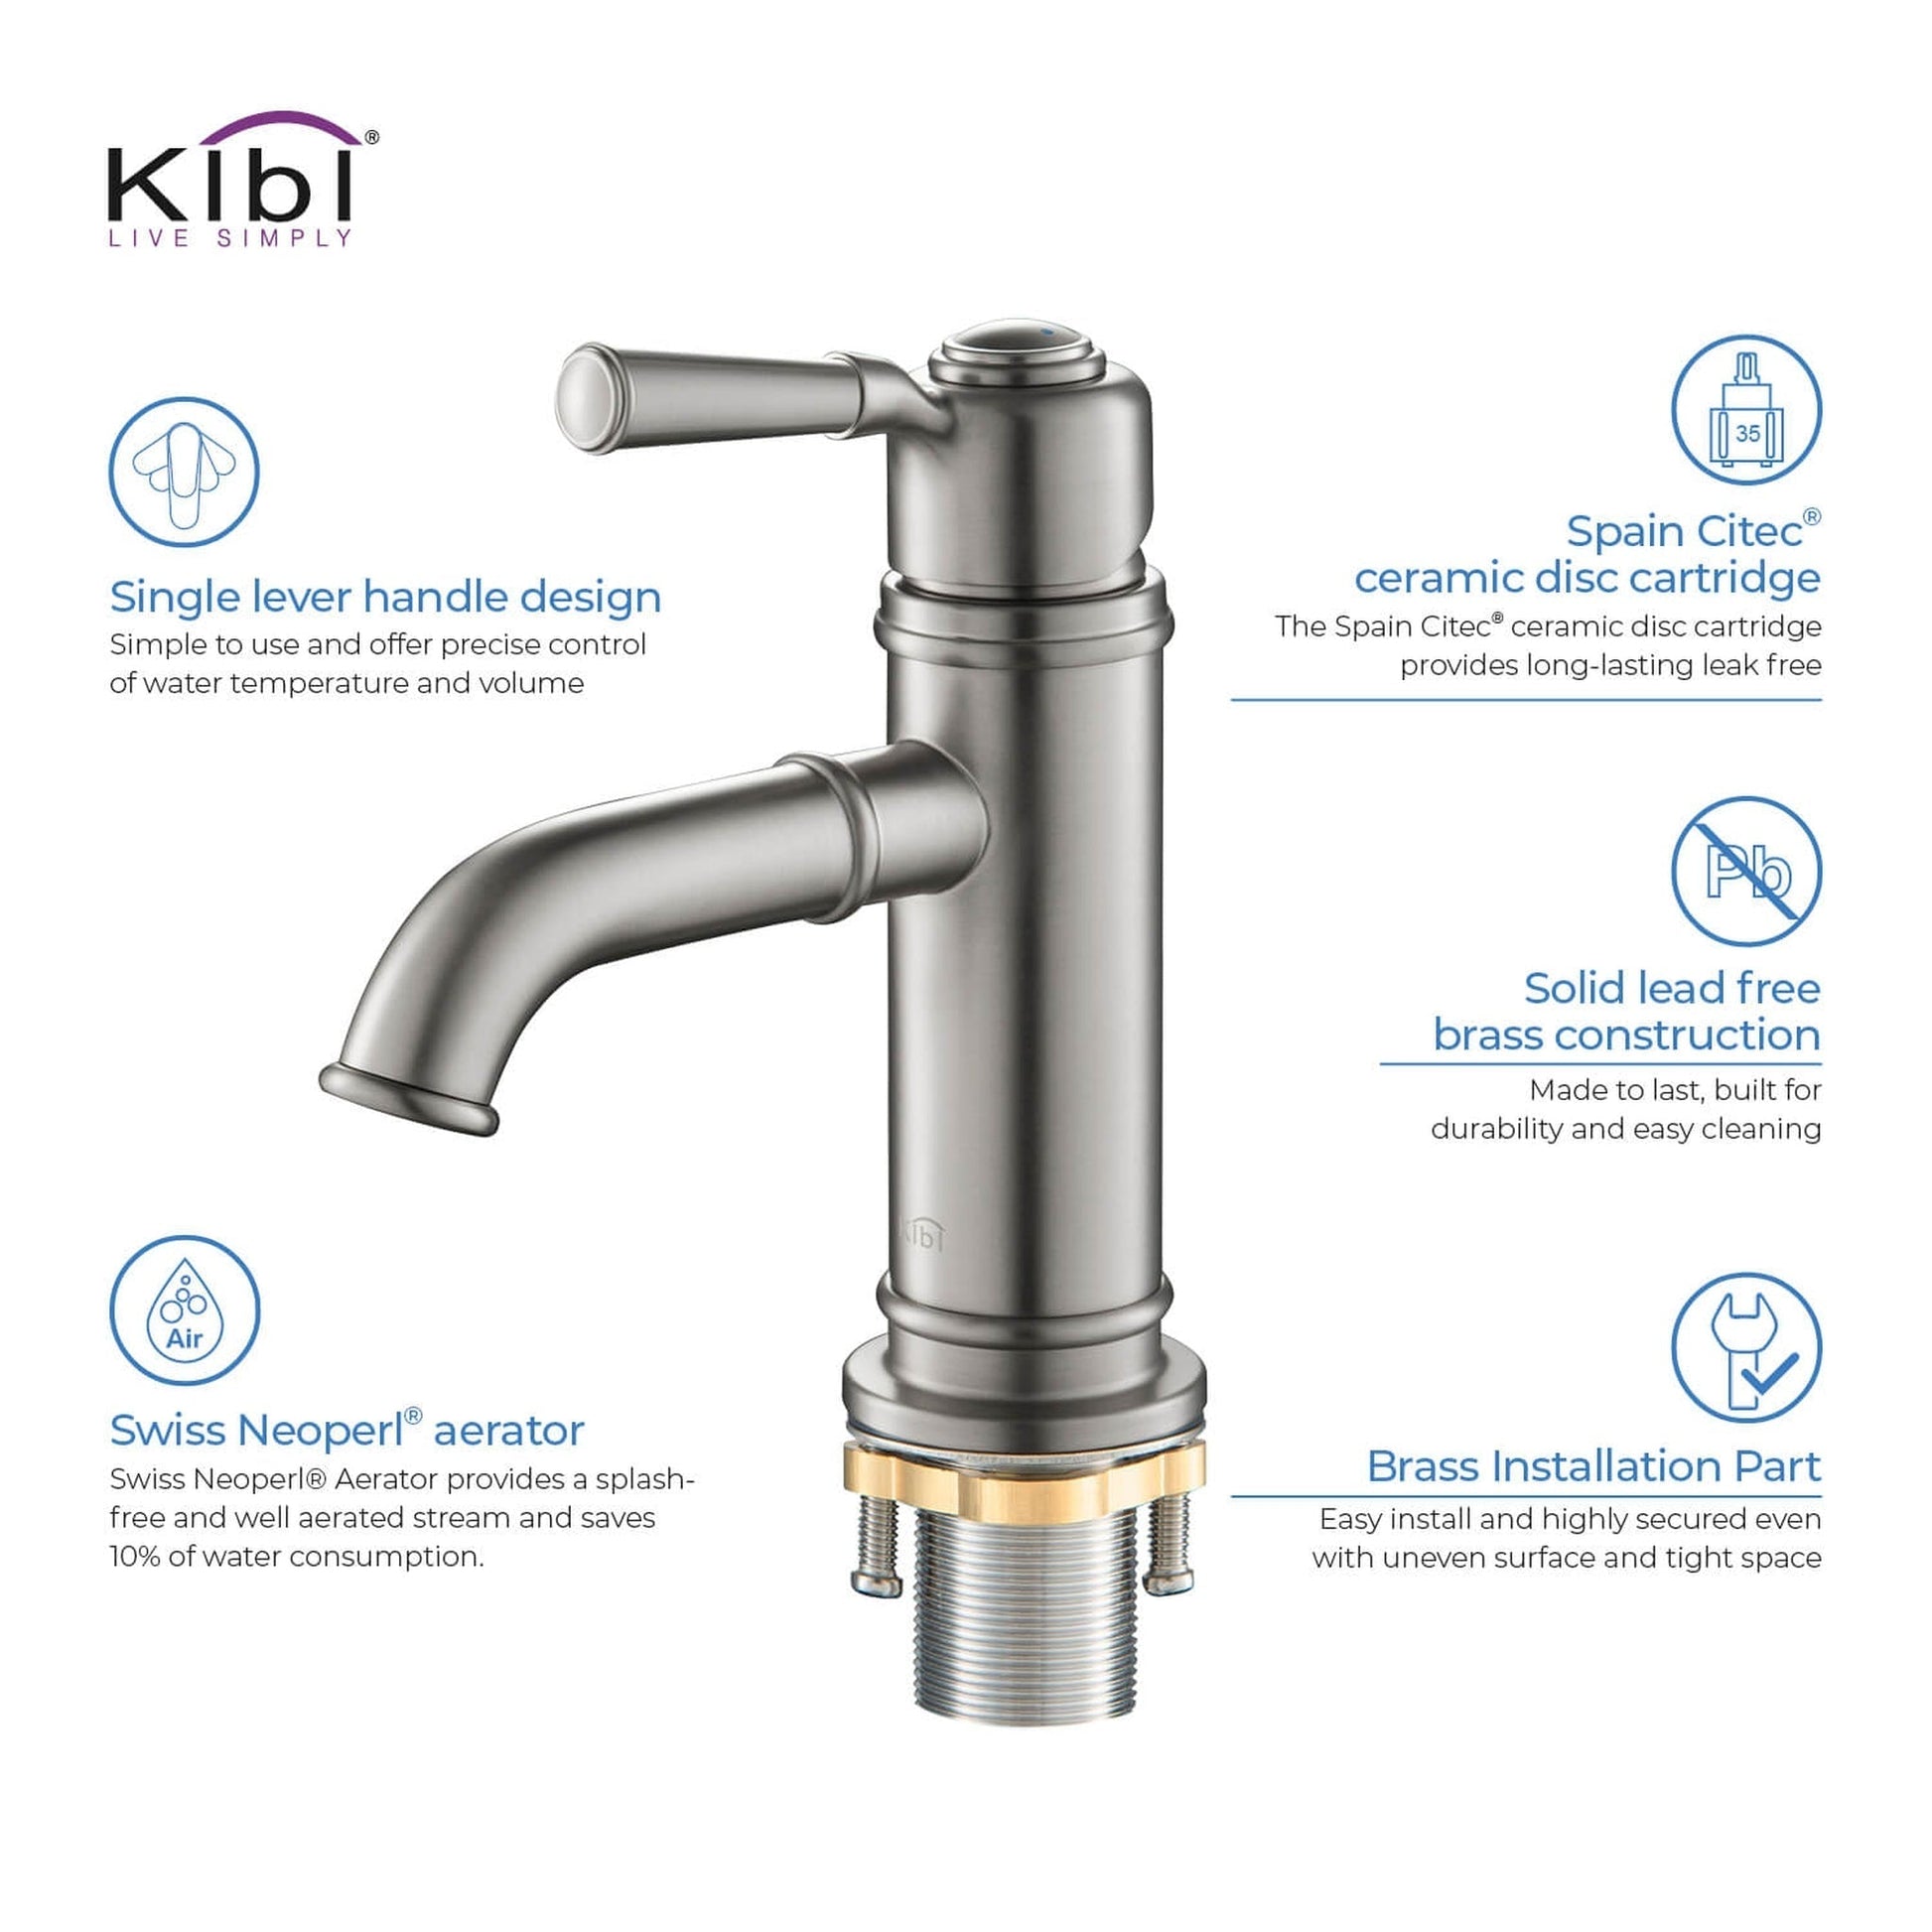 KIBI Victorian Single Handle Brushed Nickel Solid Brass Bathroom Vanity Sink Faucet With Pop-Up Drain Stopper Small Cover With Overflow